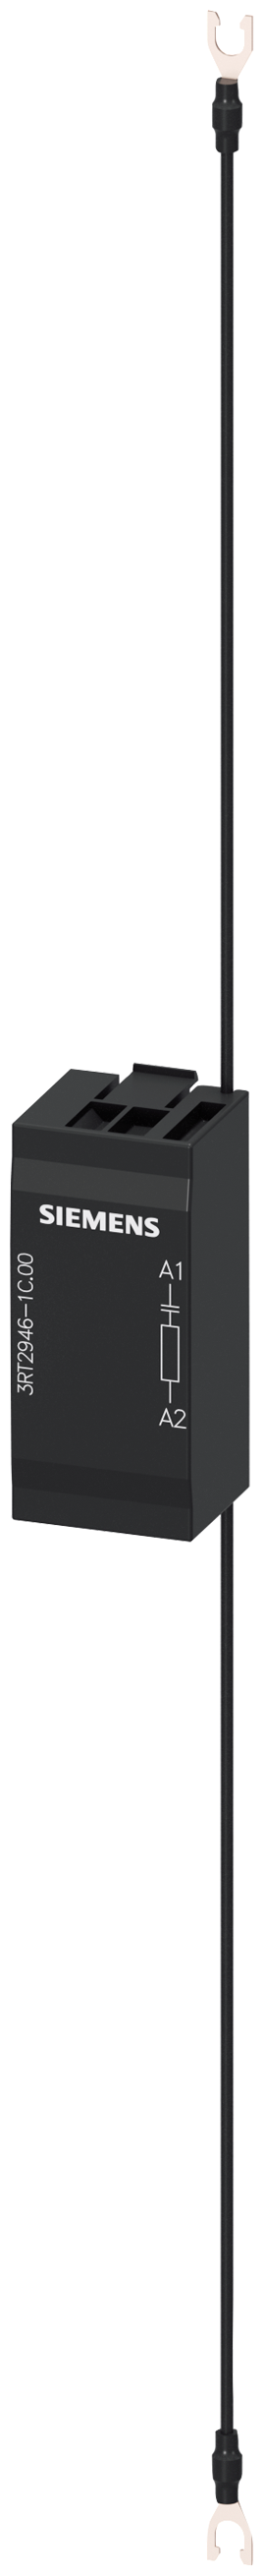 Siemens 3RT29461CD00 SURGE SUPPRESSOR RC ELEMENT AC 127 240V DC 150 250V FOR 3RT2.4 CONTACTOR S3